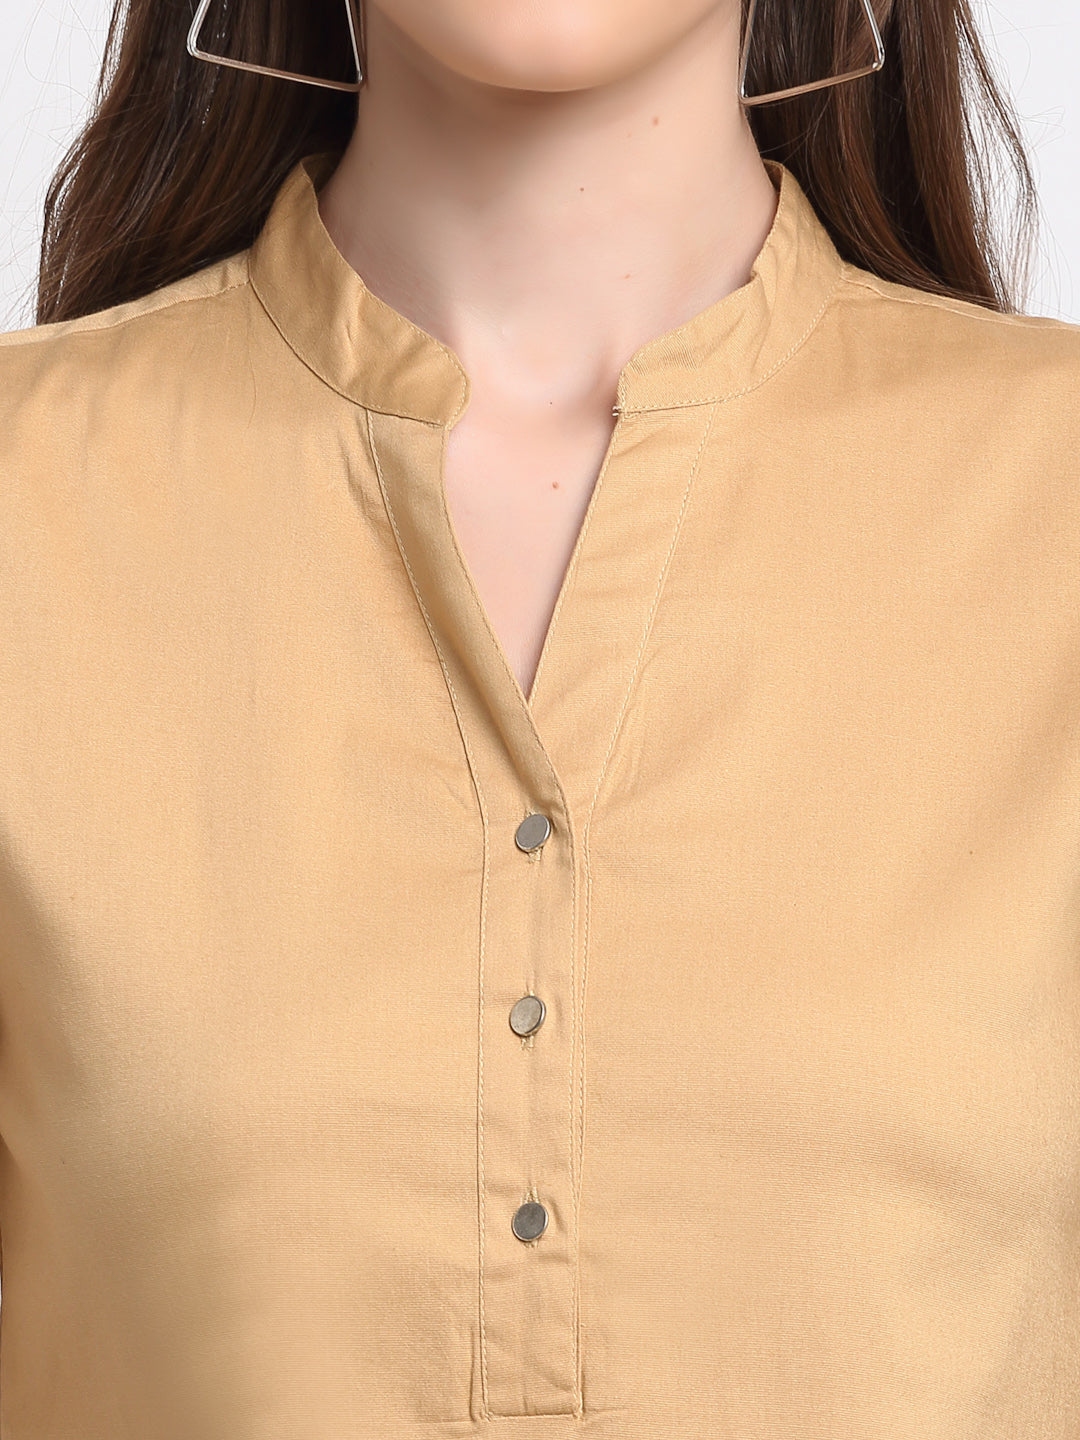 Solid Opaque Formal Shirt